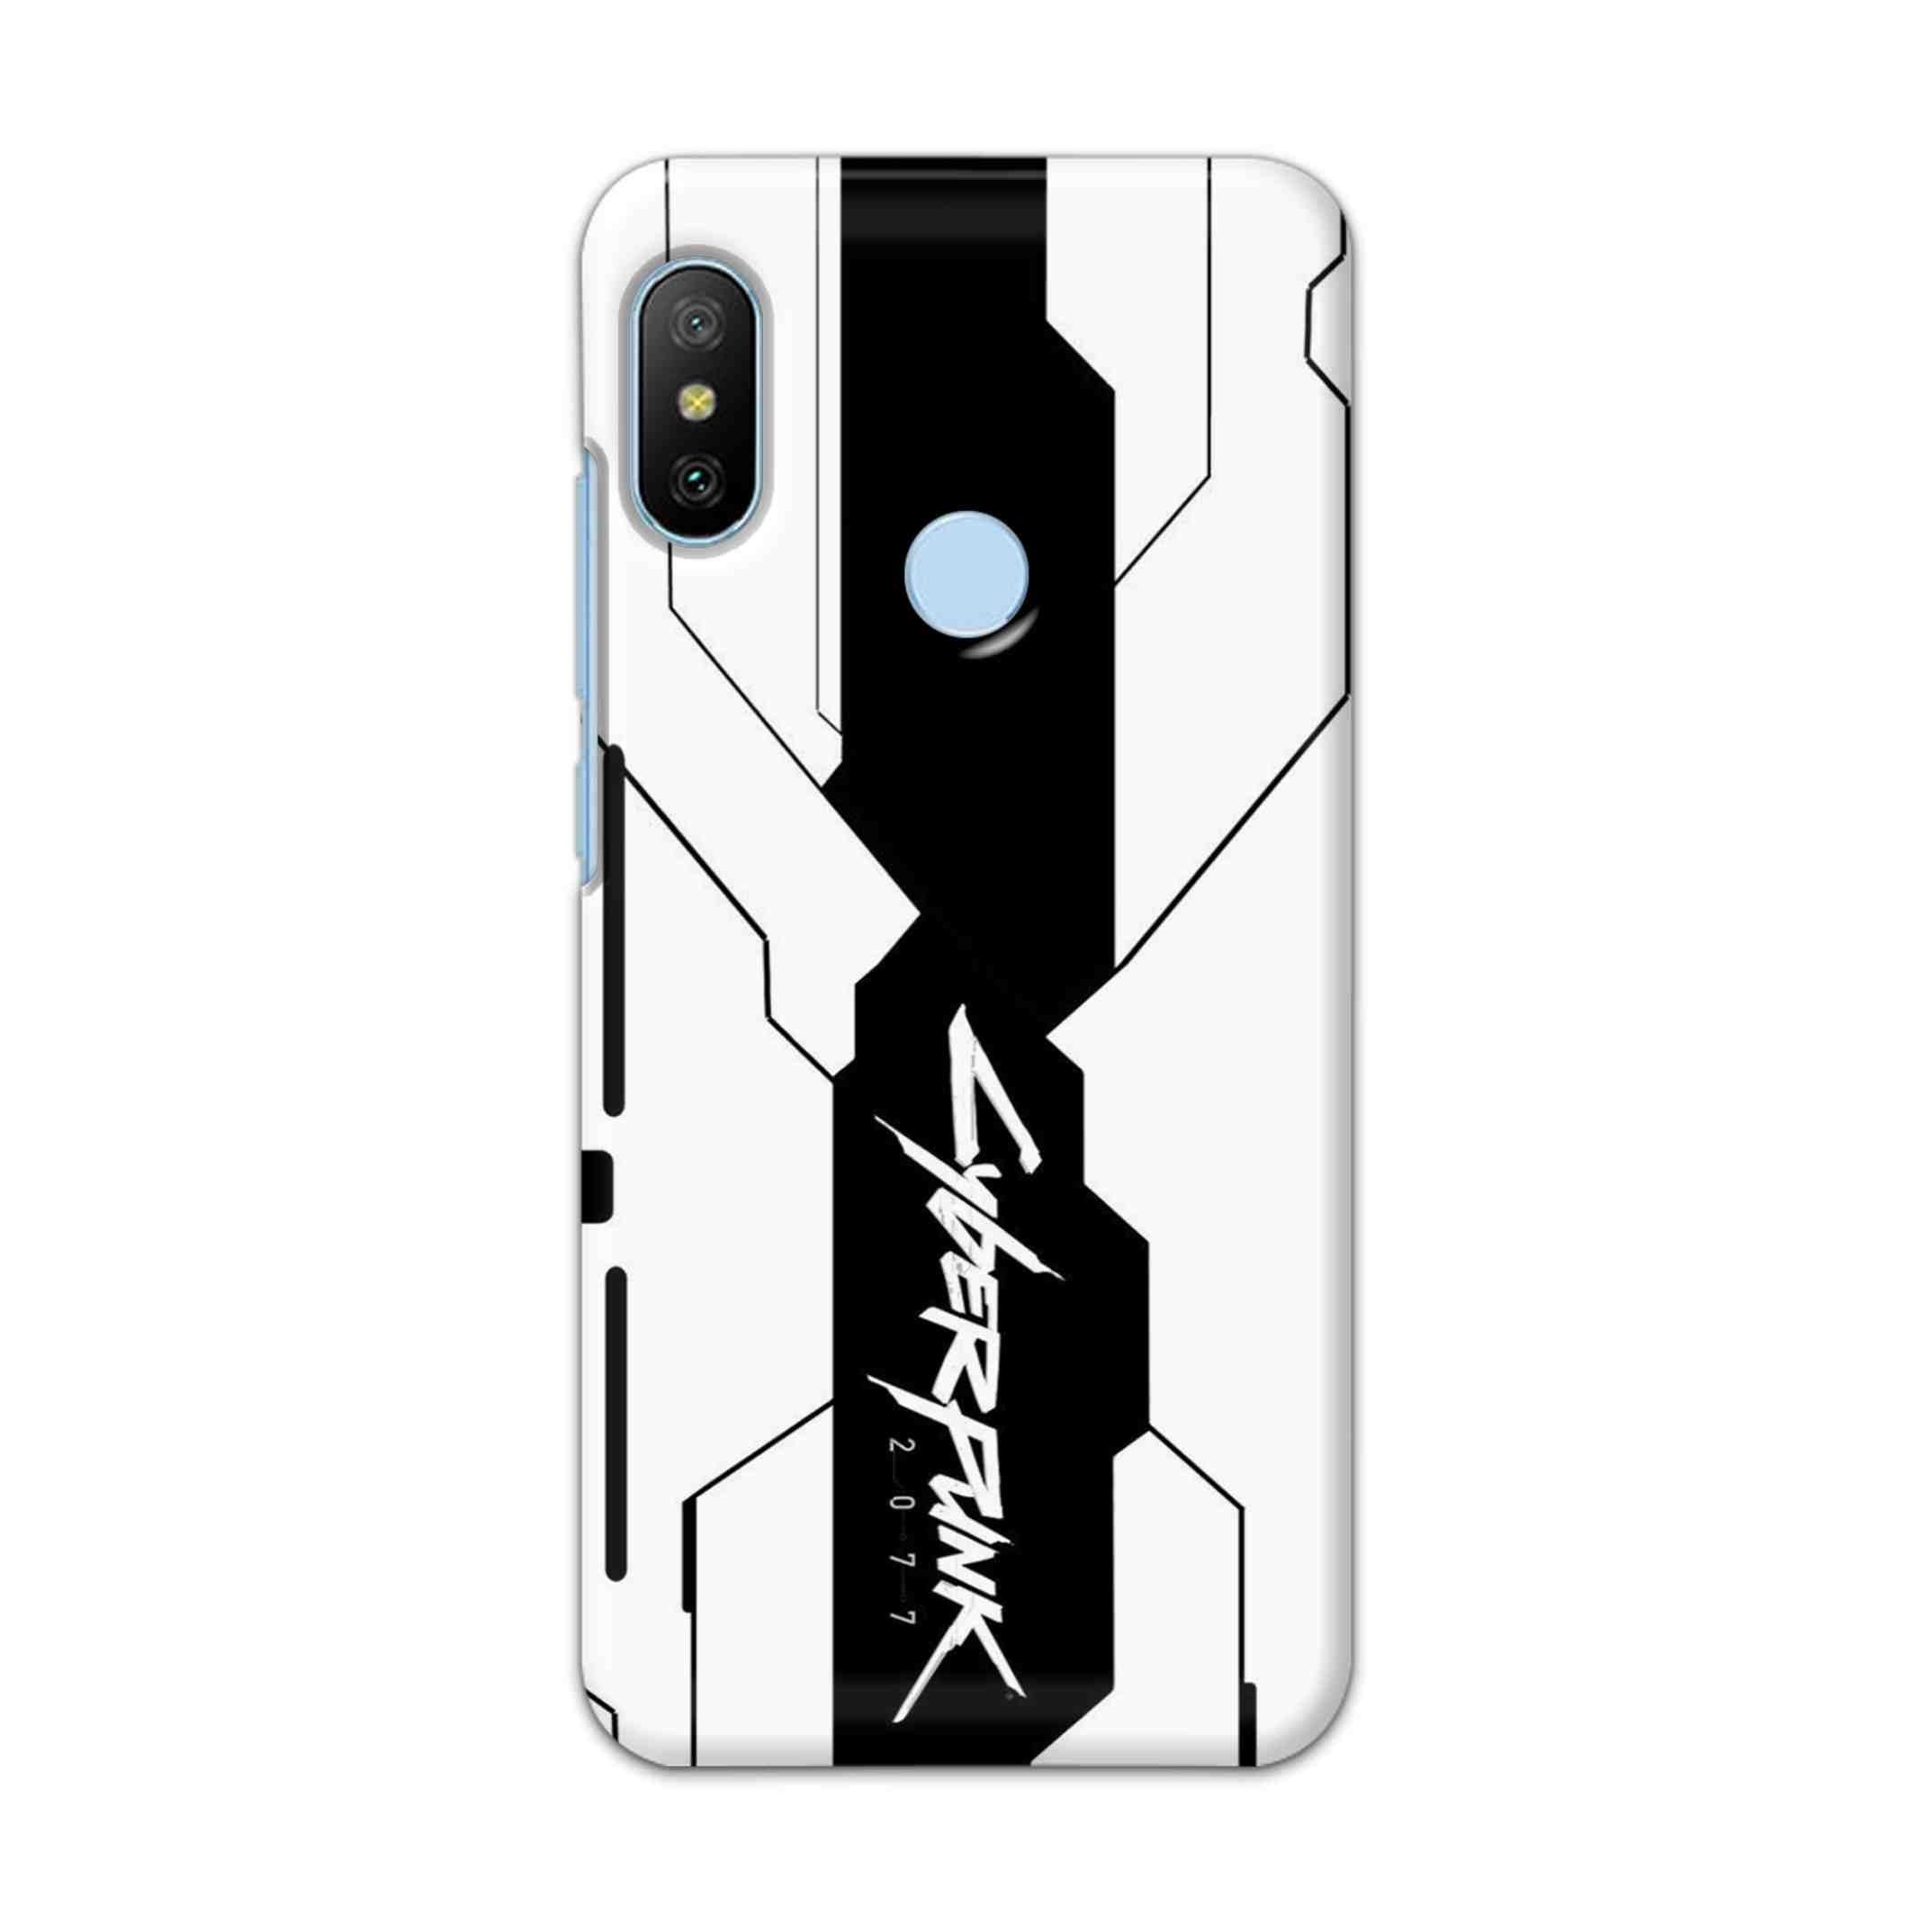 Buy Cyberpunk 2077 Hard Back Mobile Phone Case/Cover For Xiaomi A2 / 6X Online